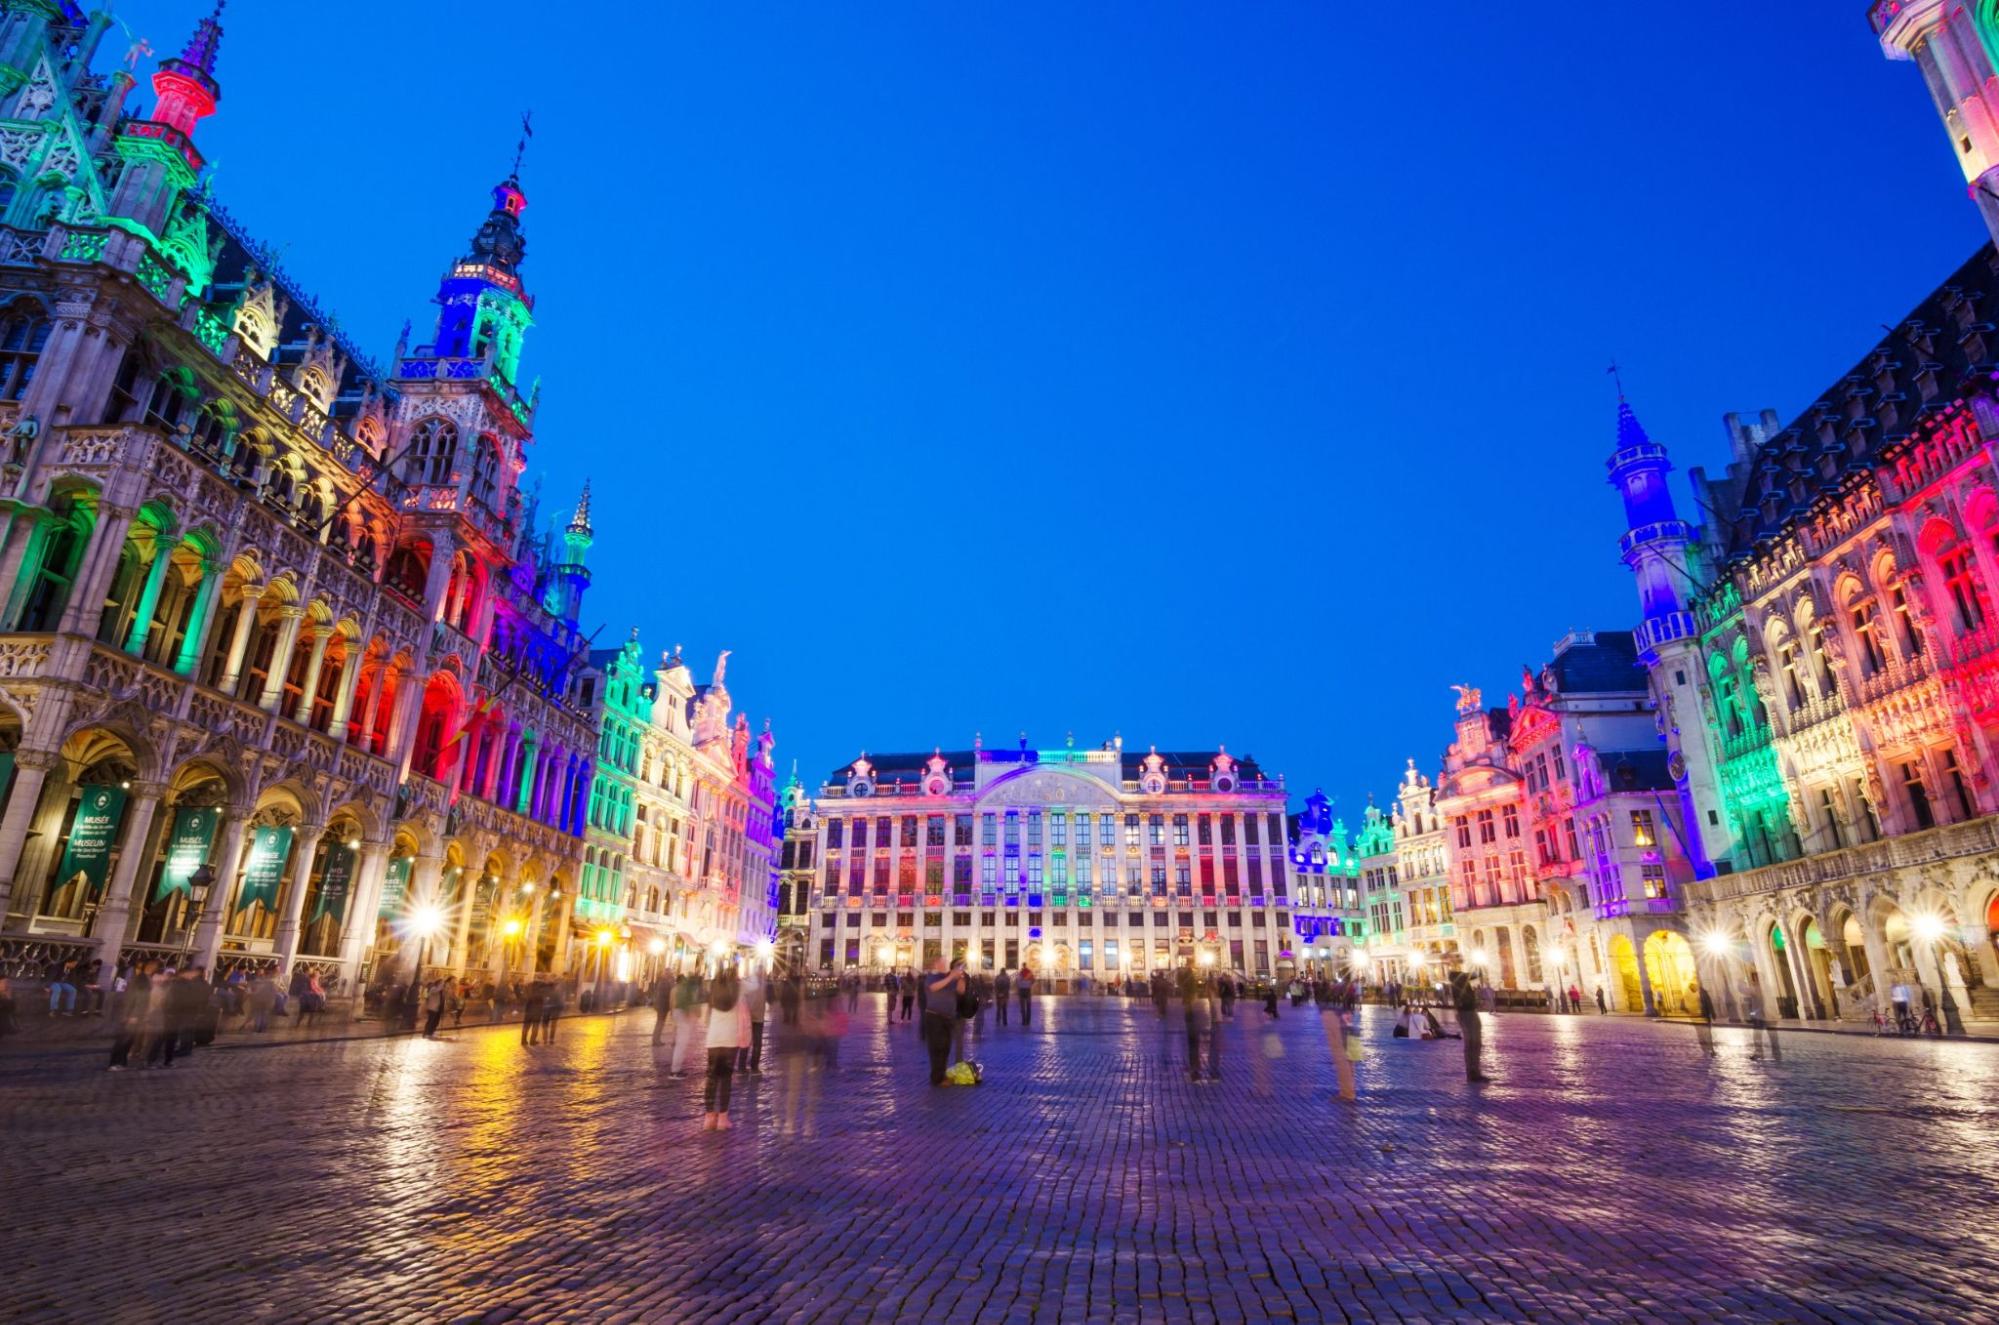 Grand Place (Grote Markt) at twilight in Brussels, Belgium